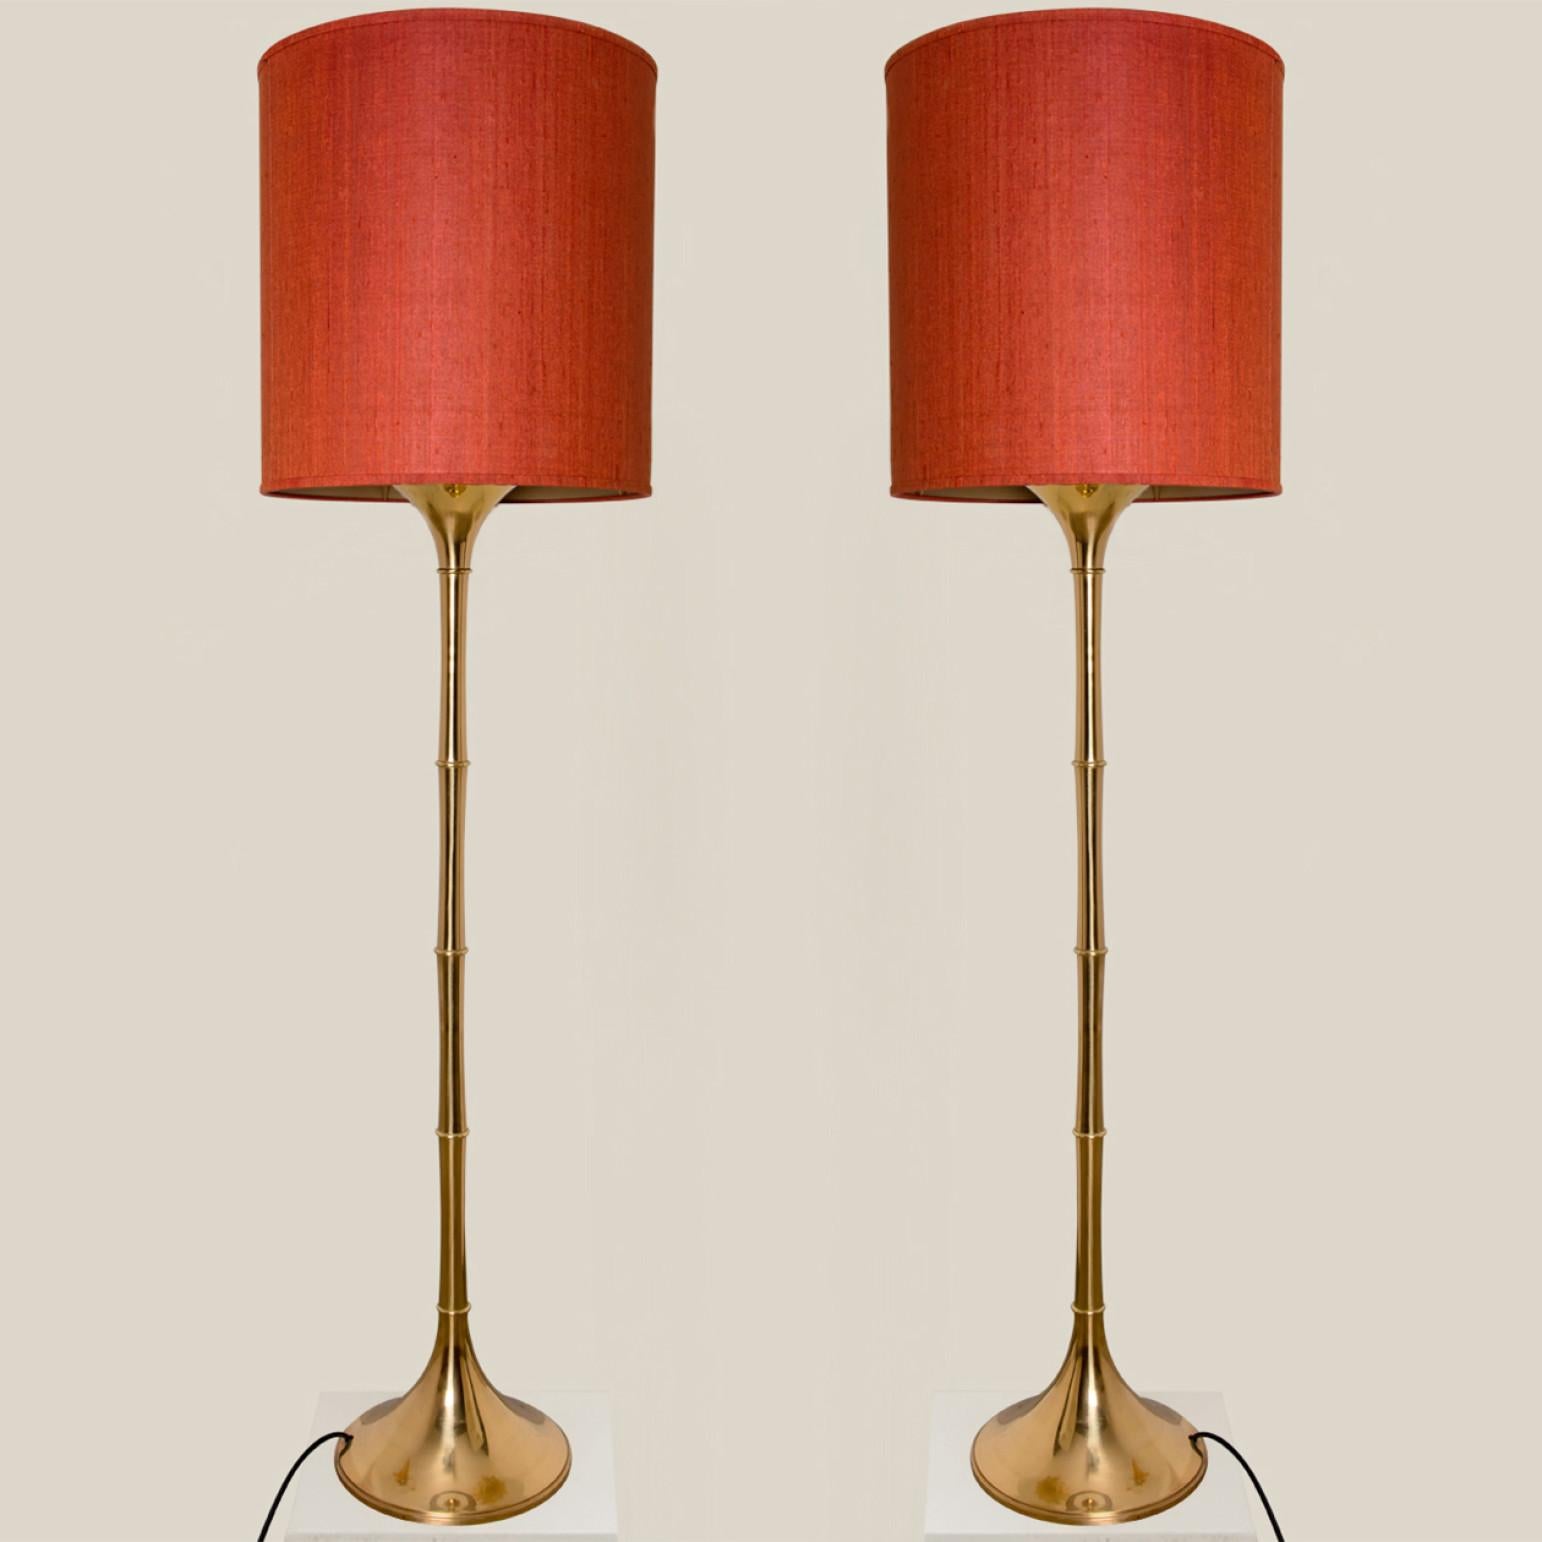 Mid-20th Century Floor Lamp Gold Designed by Ingo Maurer, Europe, Germany, 1968 For Sale